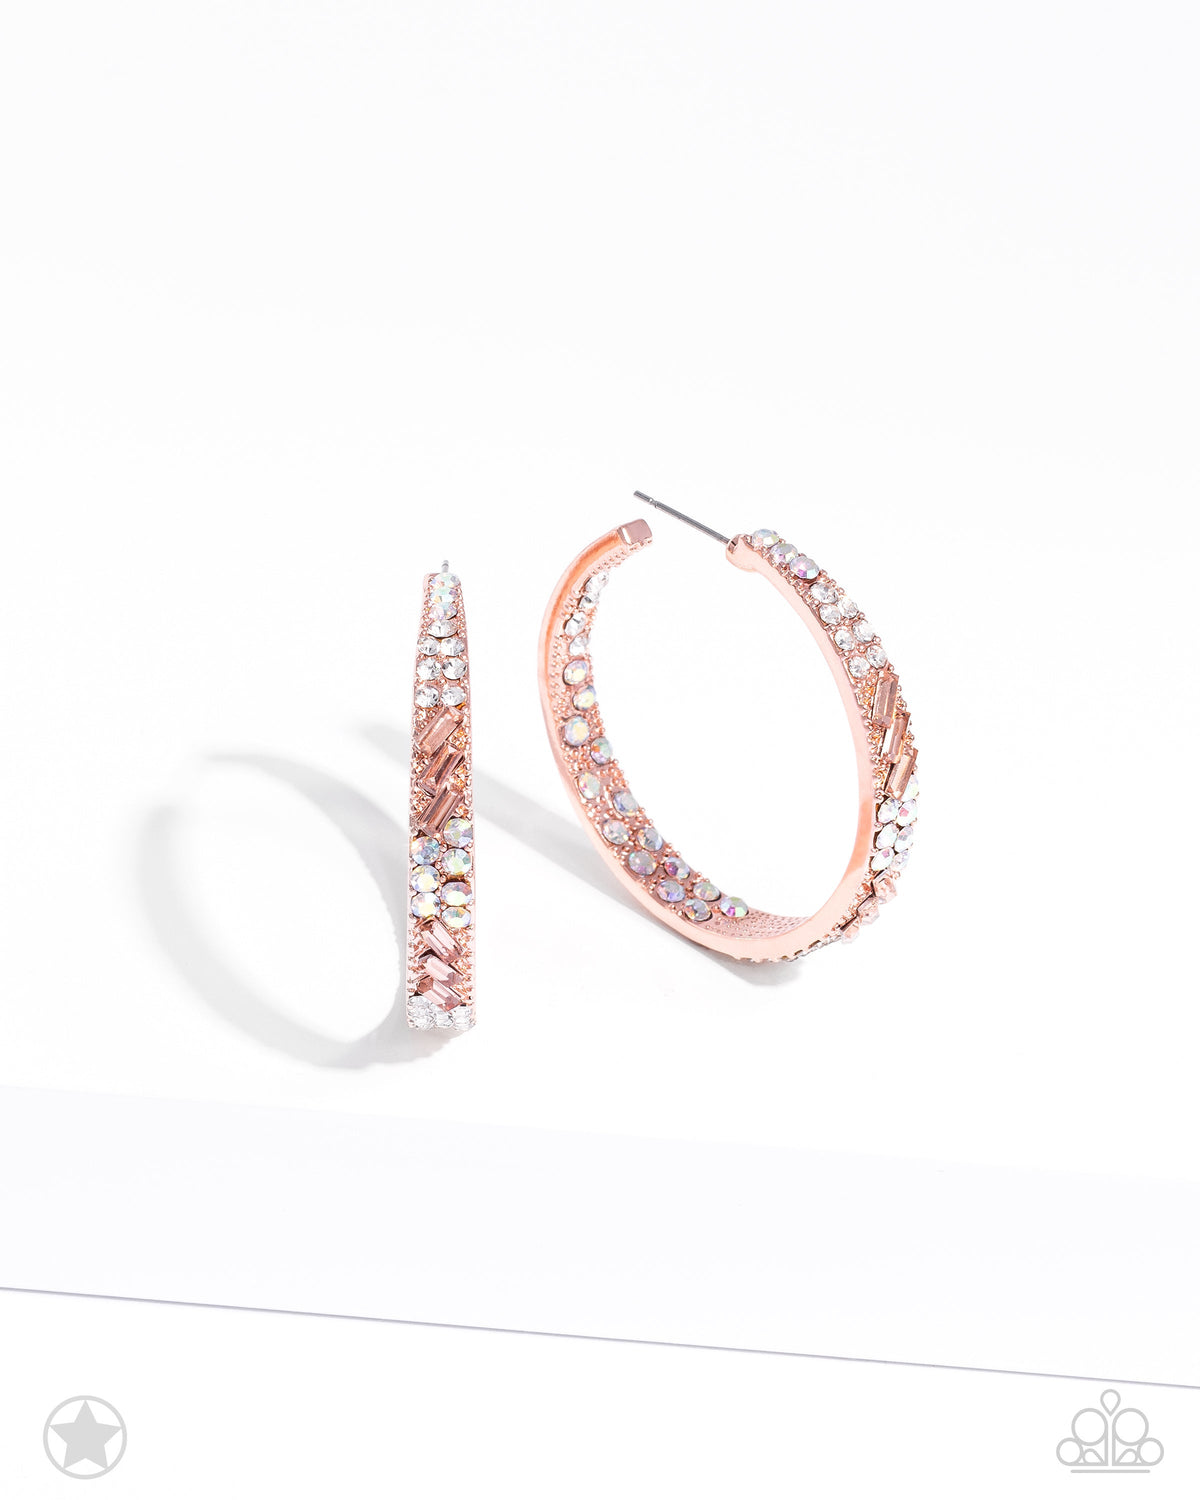 Glitzy by Association Copper &amp; White Rhinestone Hoop Earrings - Paparazzi Accessories - on bust - CarasShop.com - $5 Jewelry by Cara Jewels